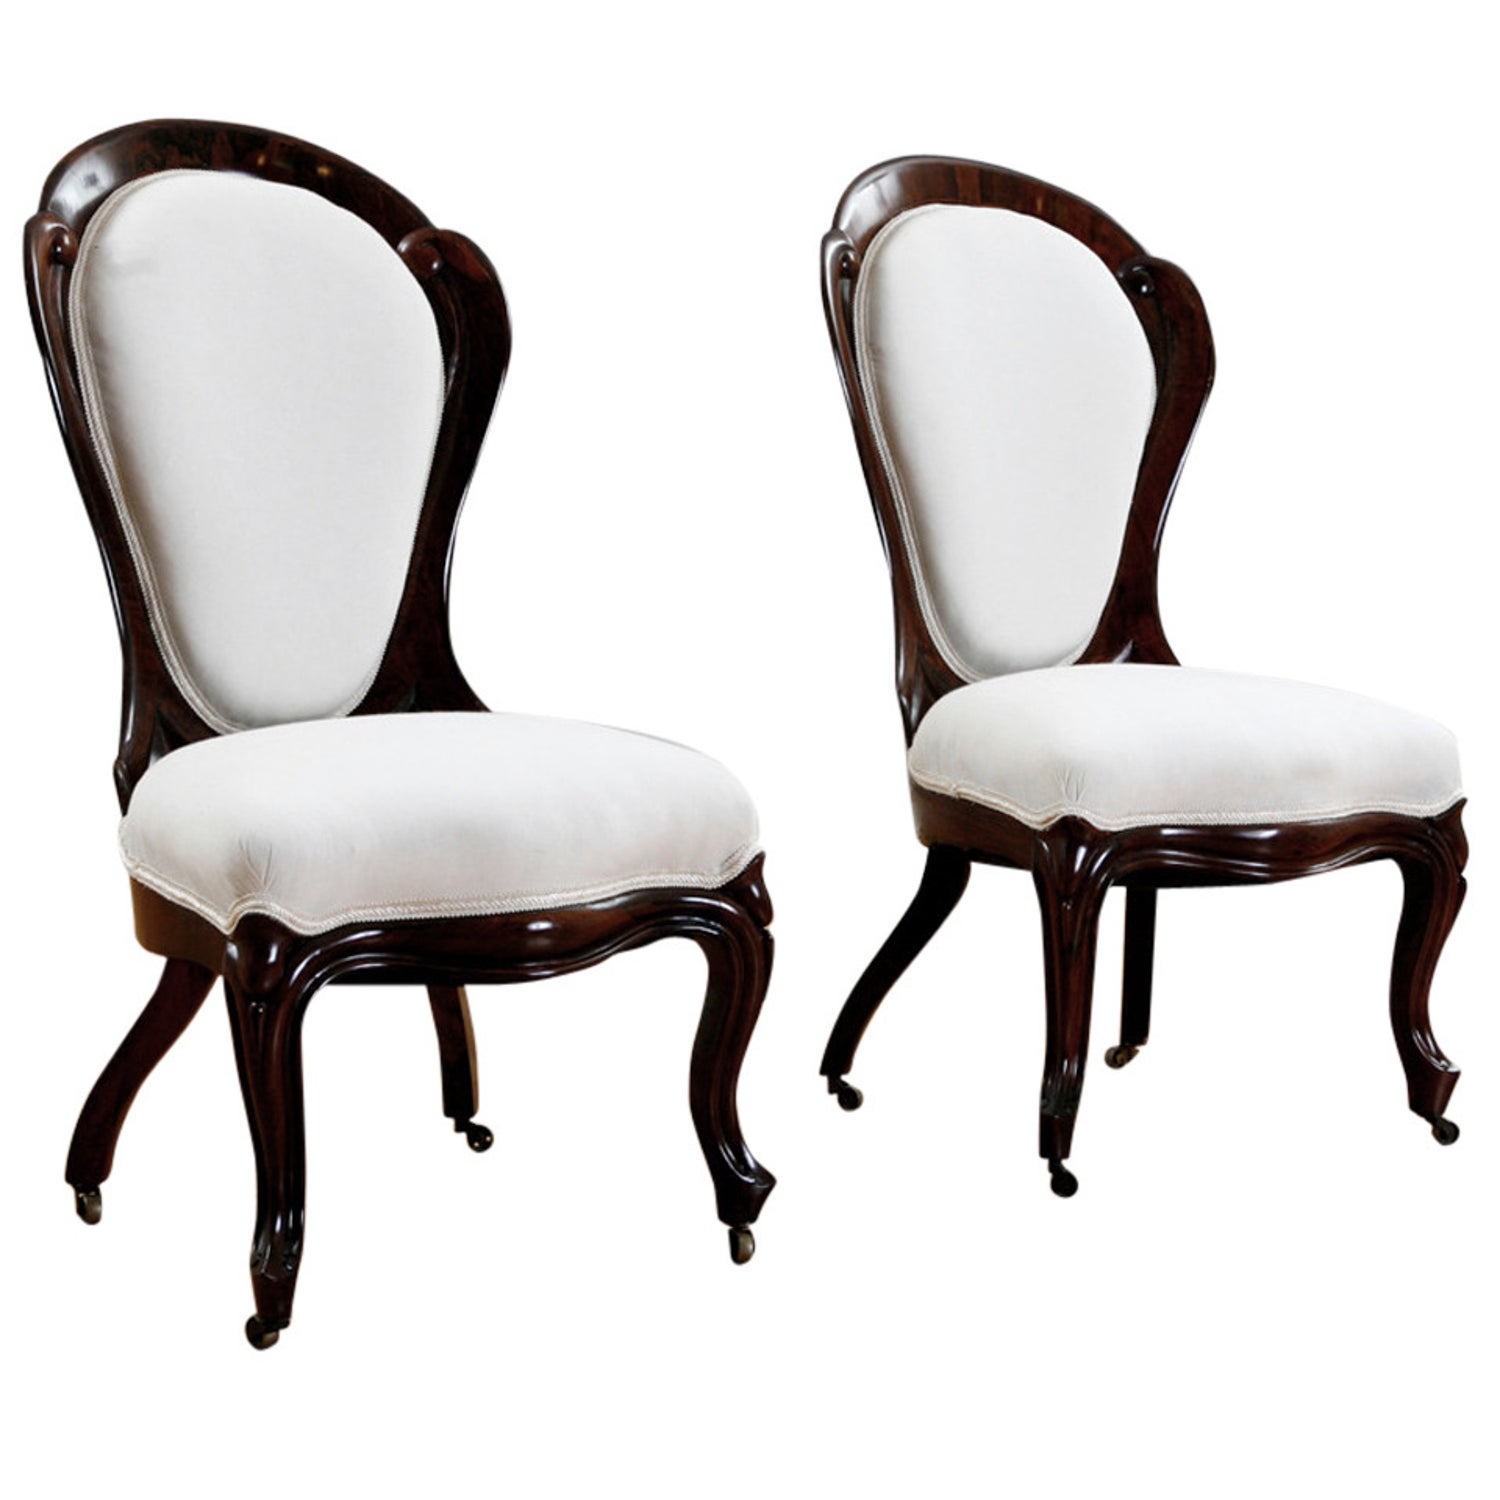 Pair of Rosewood Salon Chairs w/ Upholstery by John Henry Belter, circa  1844 For Sale at 1stDibs